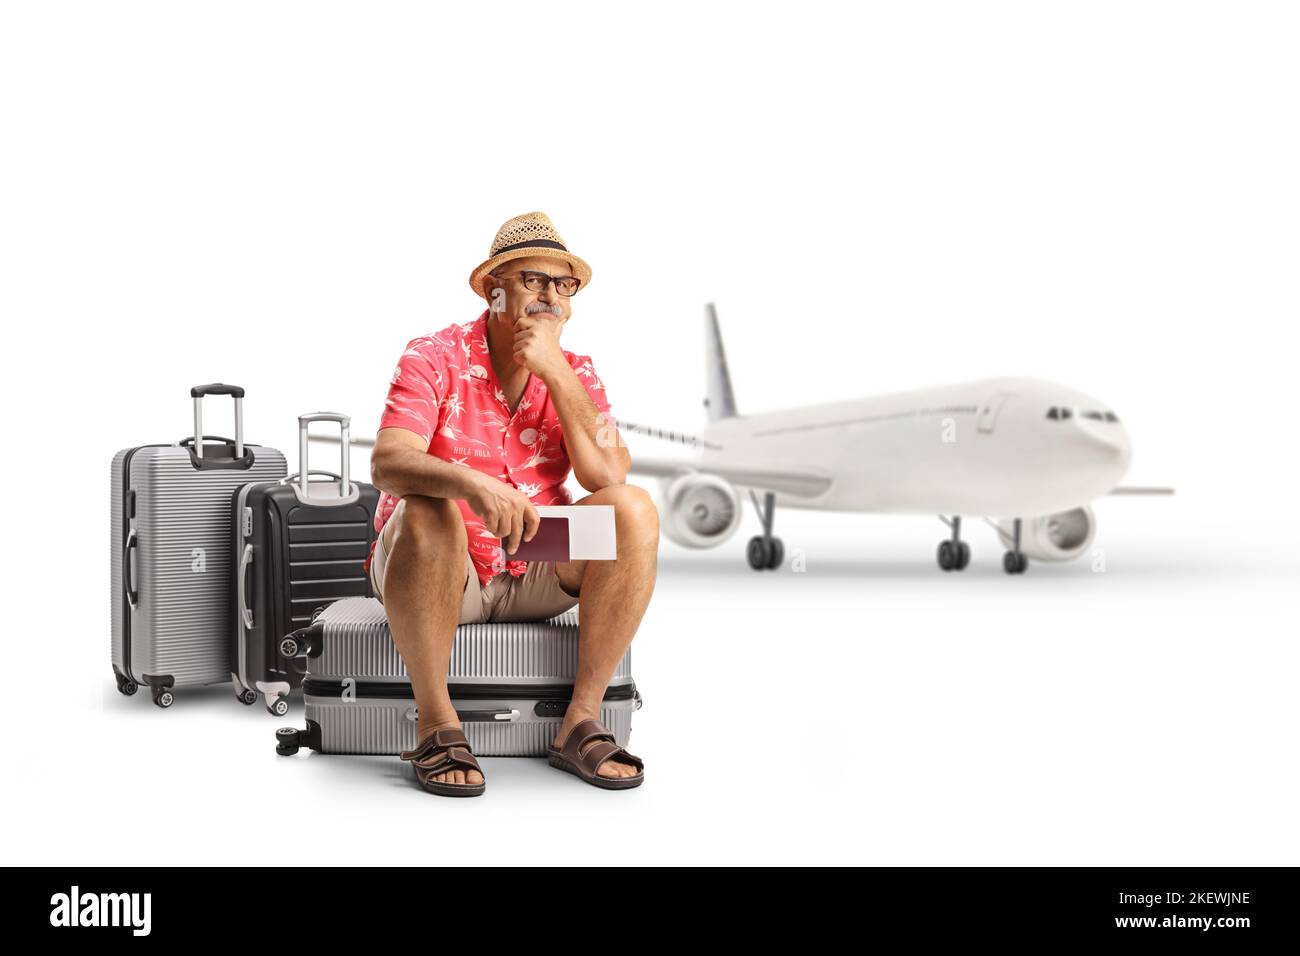 Mature male tourist sitting on a suitcase and waiting in front of an airplane isolated on white background Stock Photo